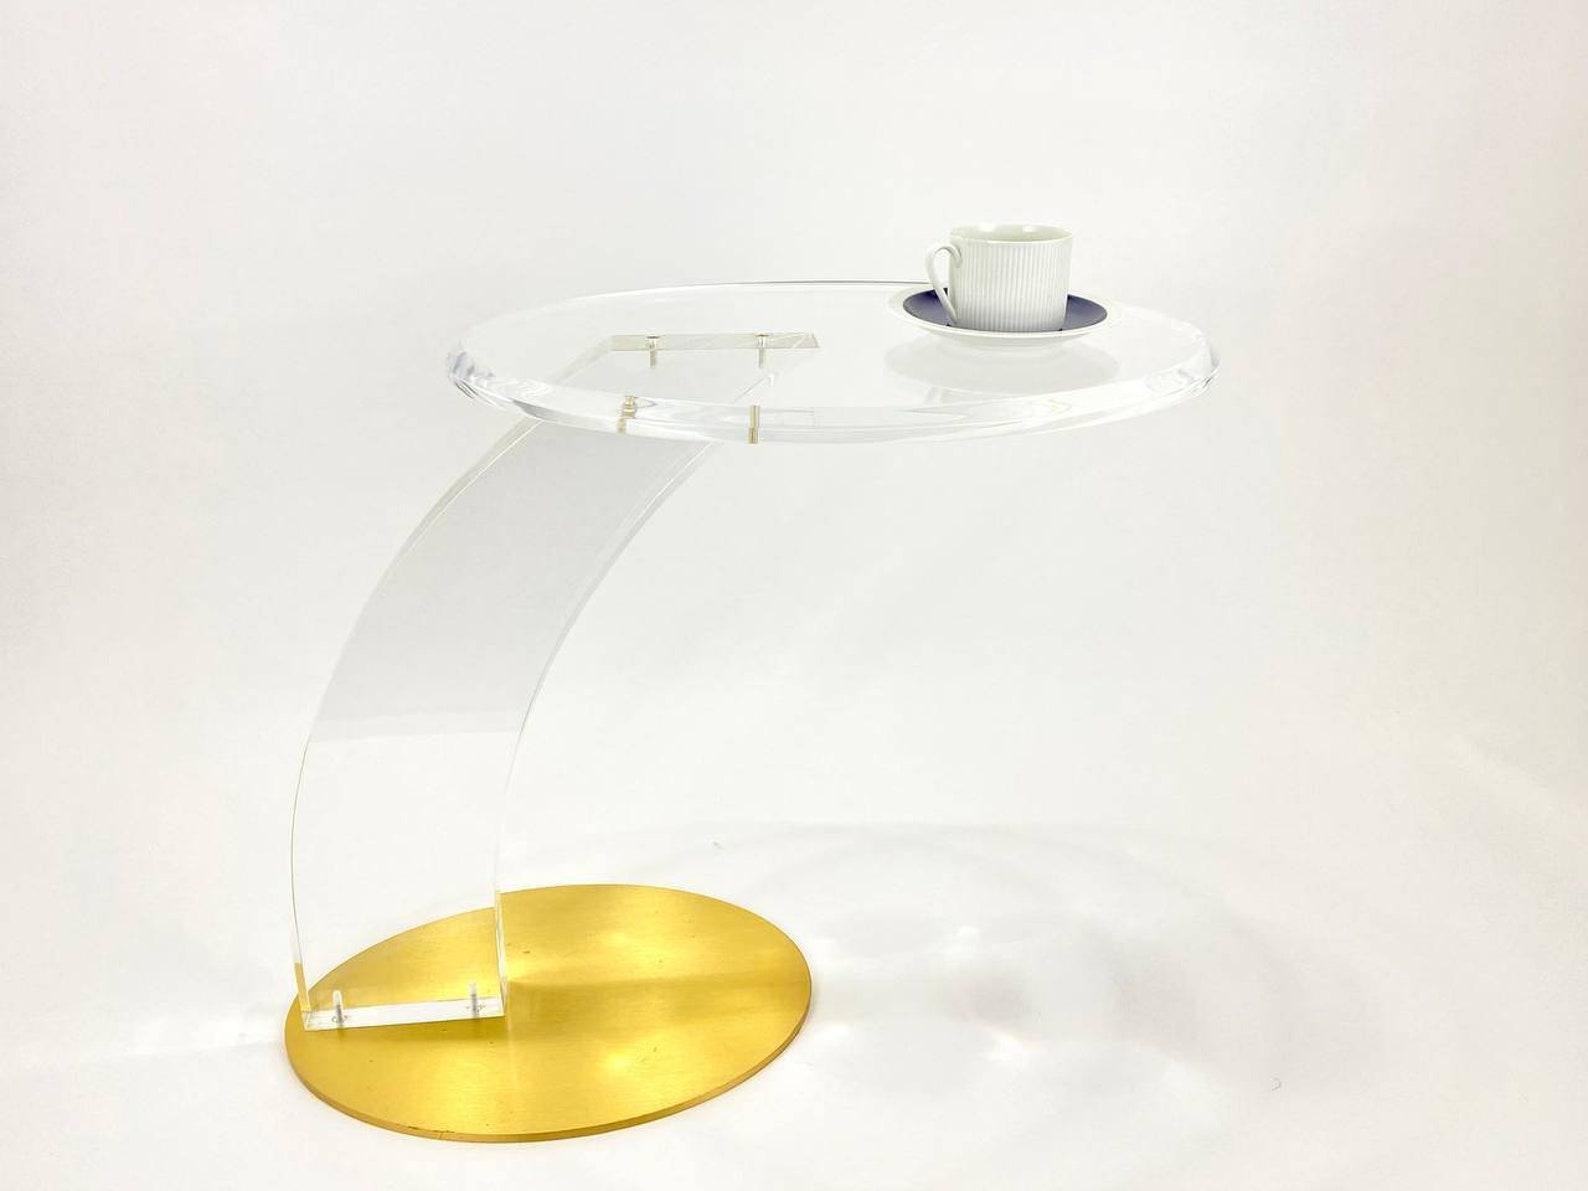 Late 20th Century Vintage Stylish Coffee Table in Plexiglass & Brass, Italian Coffee Table, 1970s For Sale